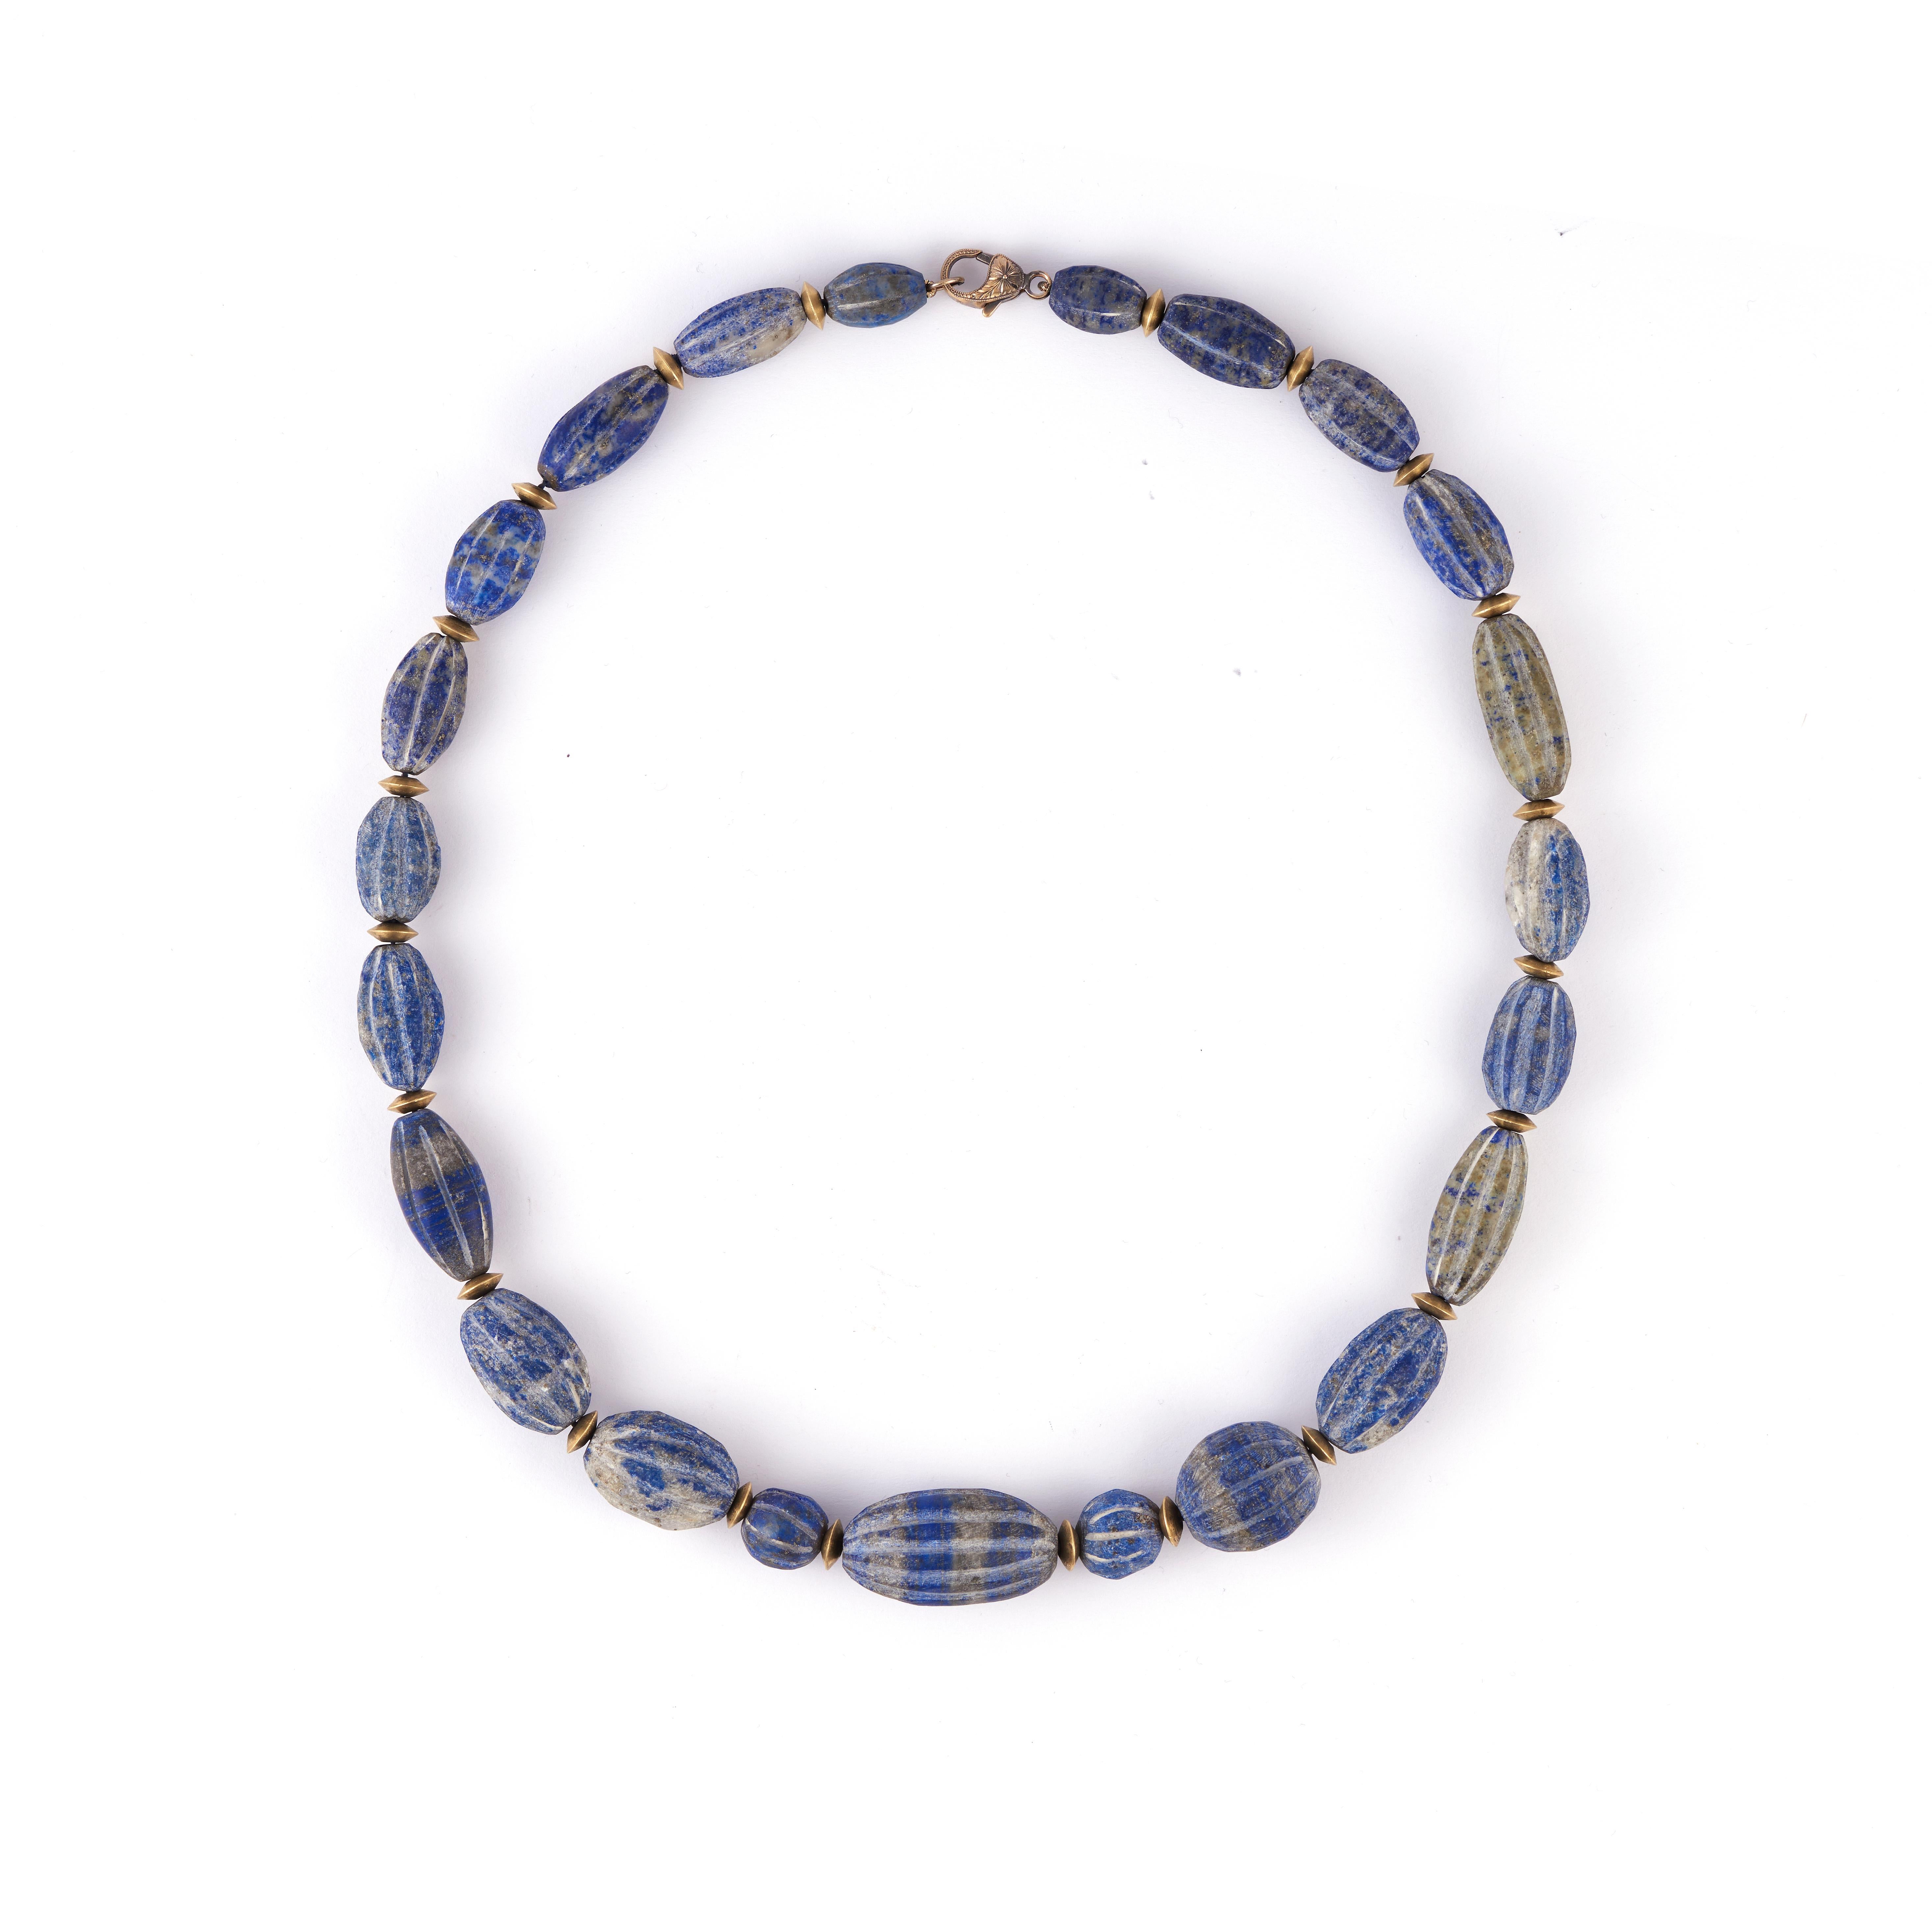 Oblong Lapis Lazuli Beads Circa 1200-1600
18kt Yellow Gold clasp and additional beads
22 inches long

Los Angeles-based jewelry designer Sylva Yepremian has over 20 years of experience crafting custom pieces for clients. Her own line Sylva & Cie is